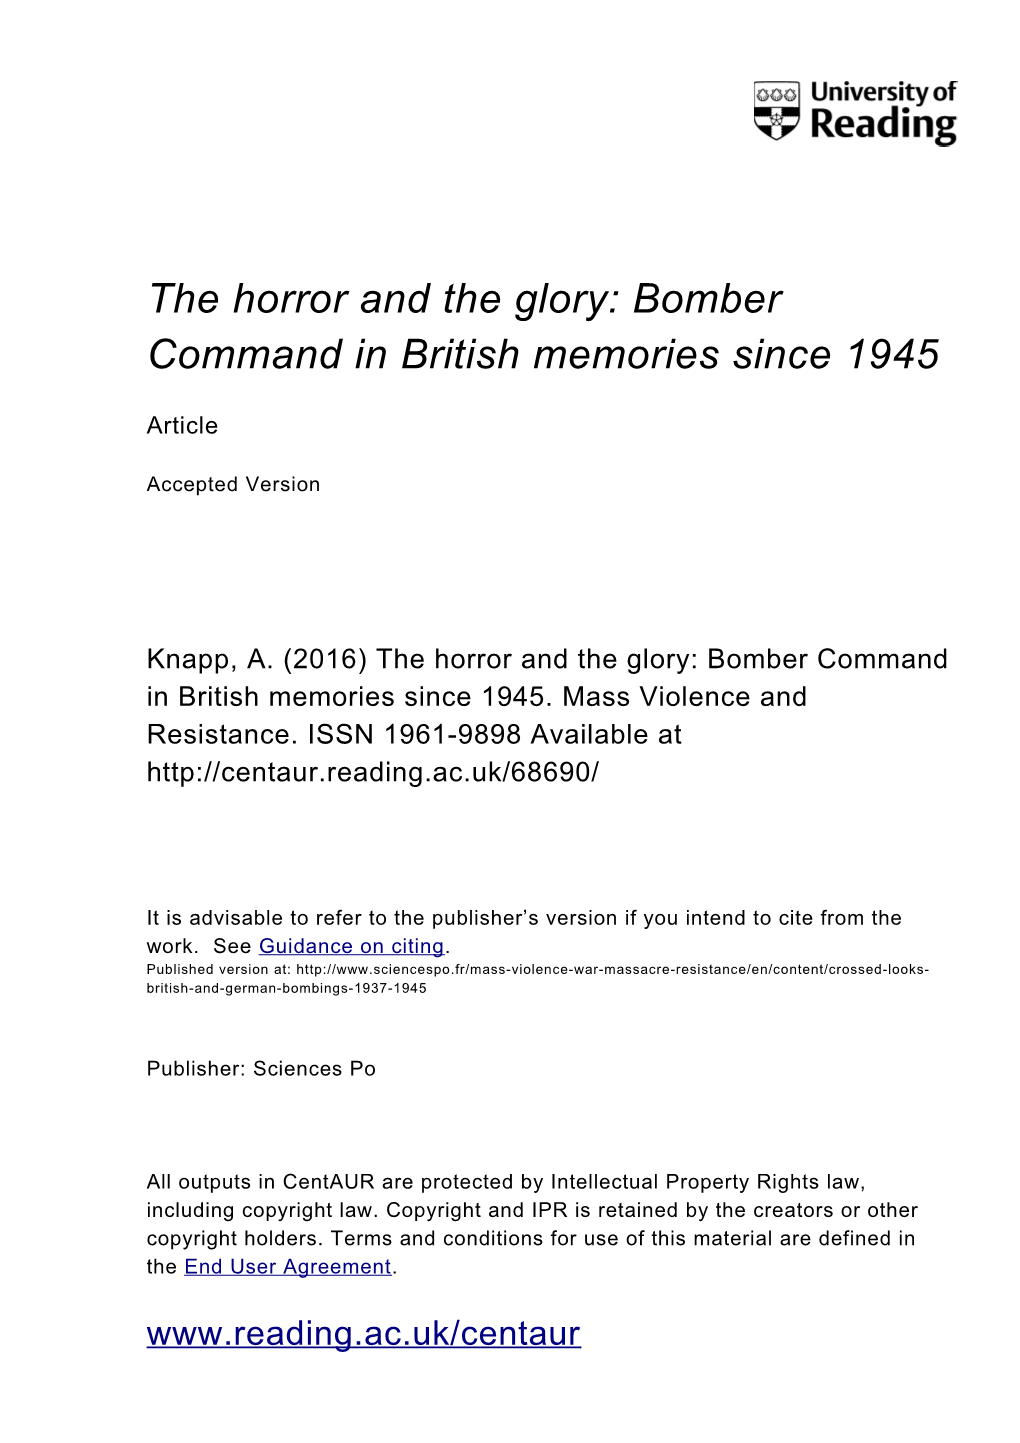 The Horror and the Glory: Bomber Command in British Memories Since 1945